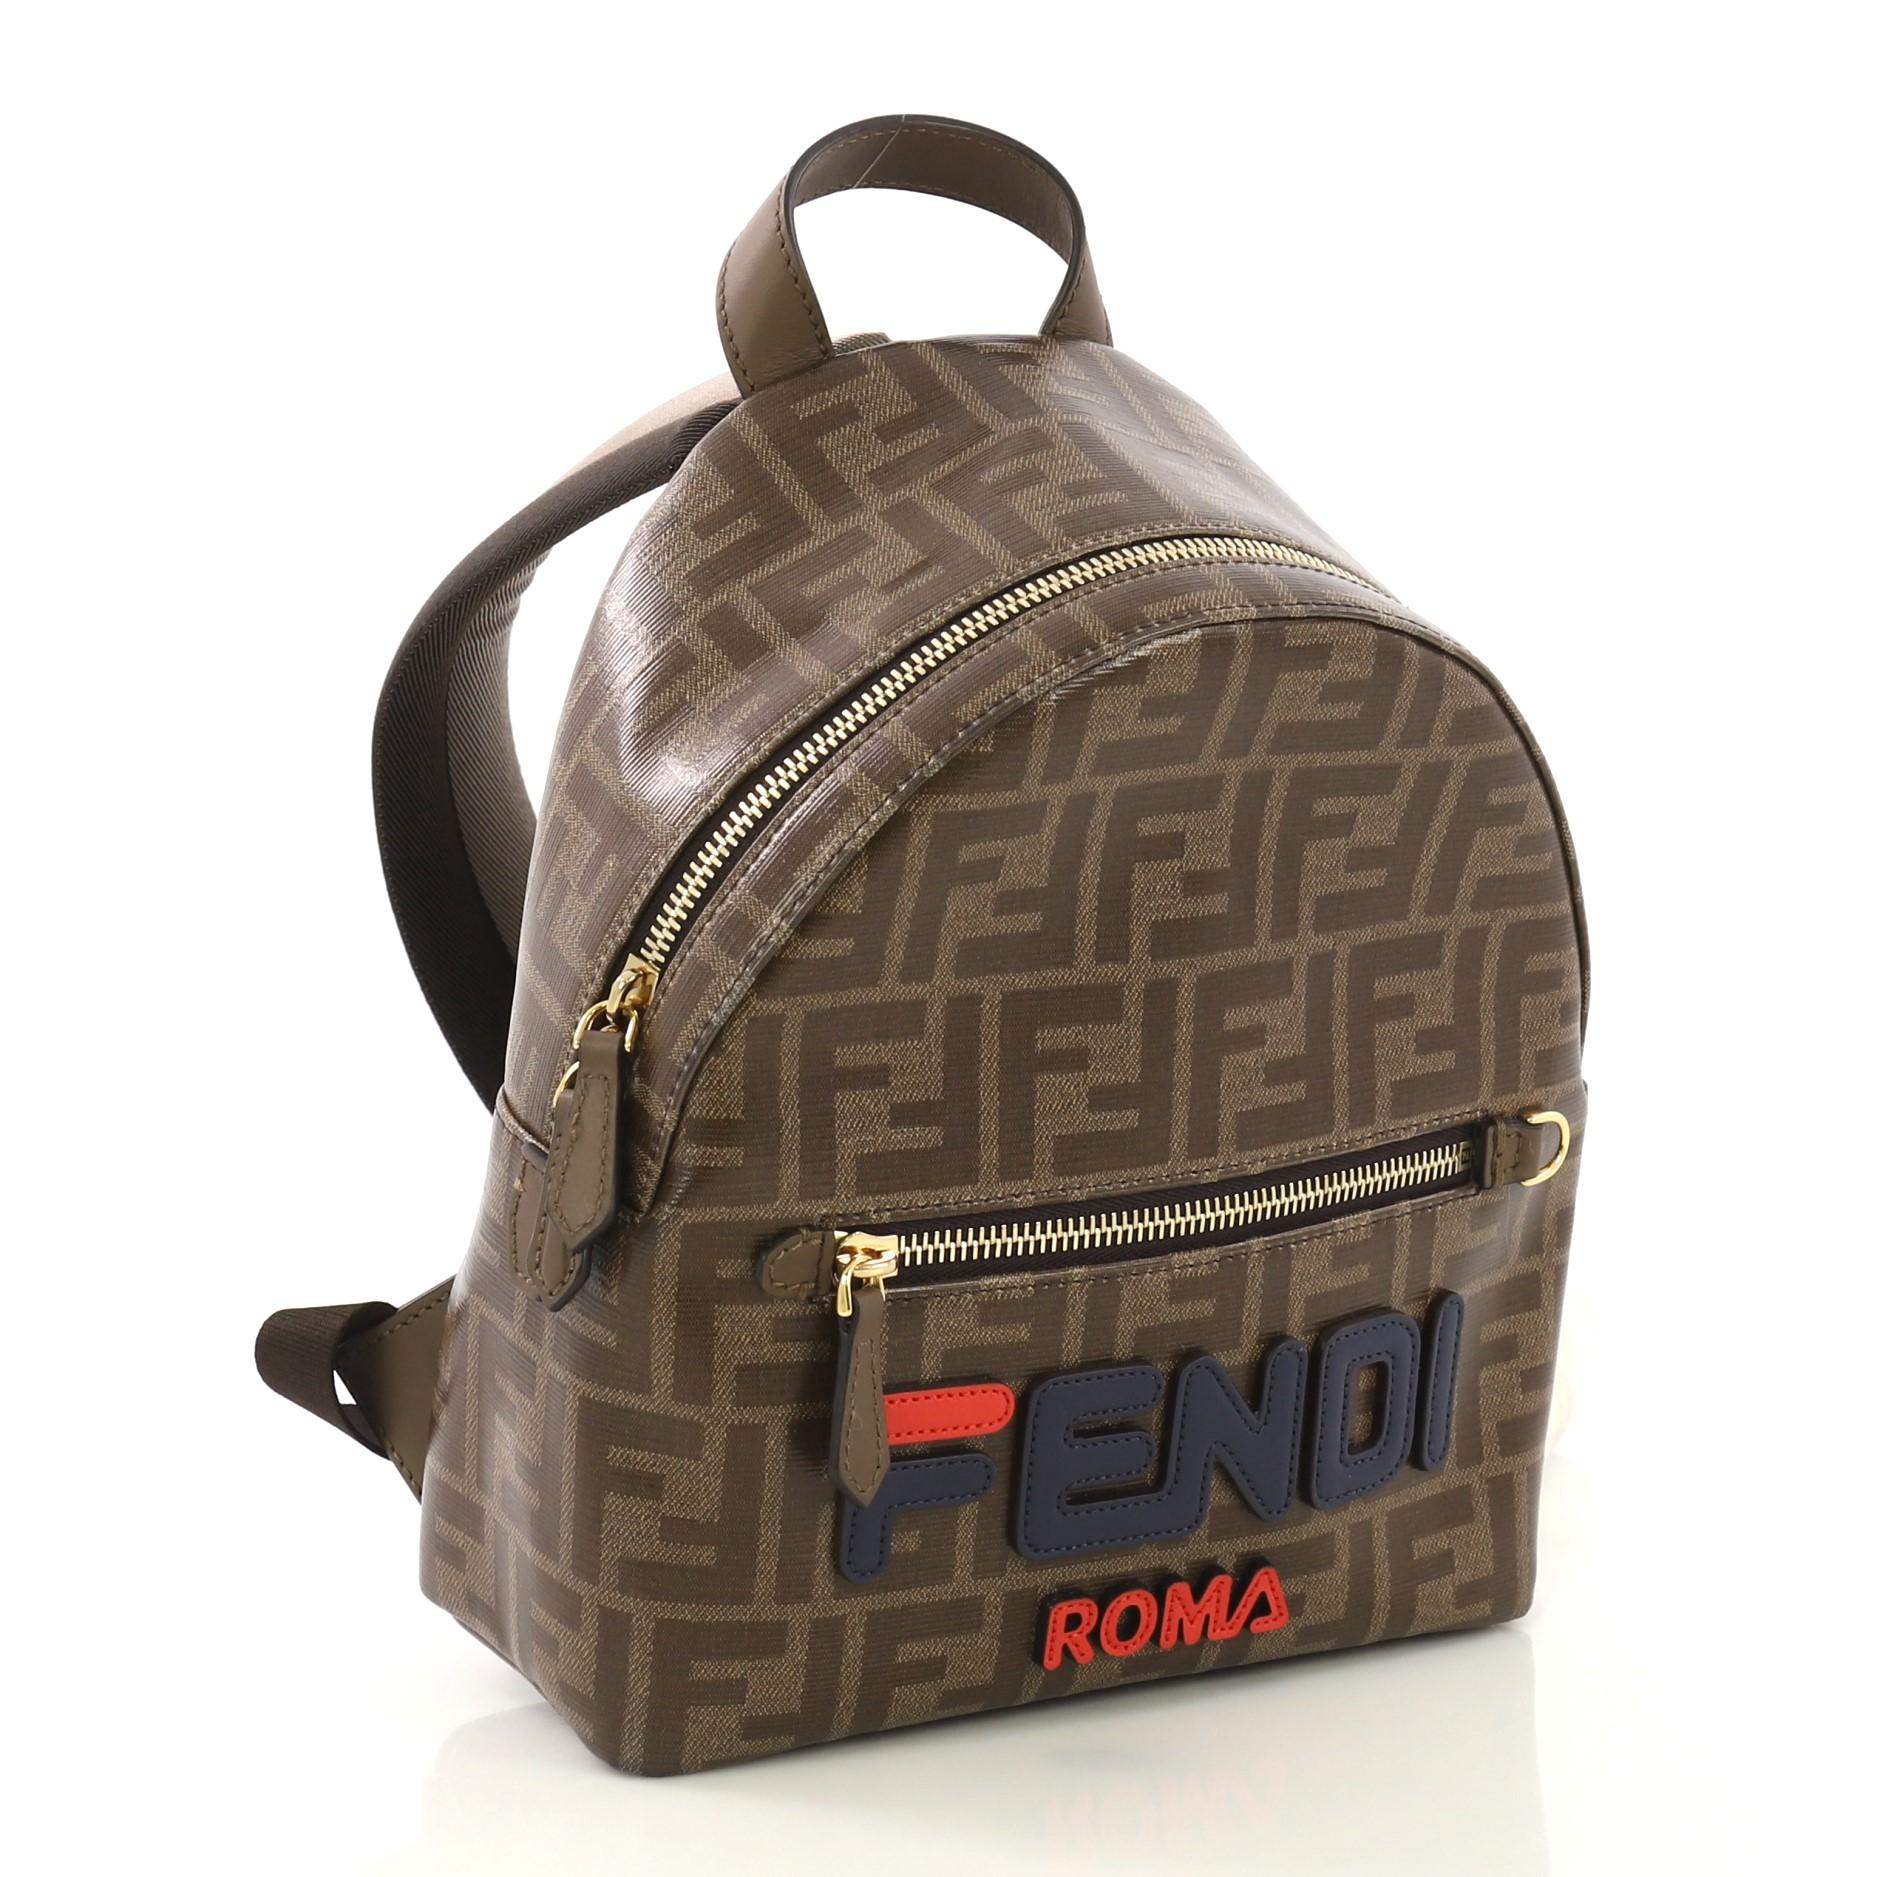 This Fendi Mania Logo Backpack Zucca Coated Canvas, crafted from brown zucca coated canvas, features adjustable shoulder straps, front zip pocket, and gold-tone hardware. Its zip closure opens to a brown fabric interior with zip pocket. 

Estimated